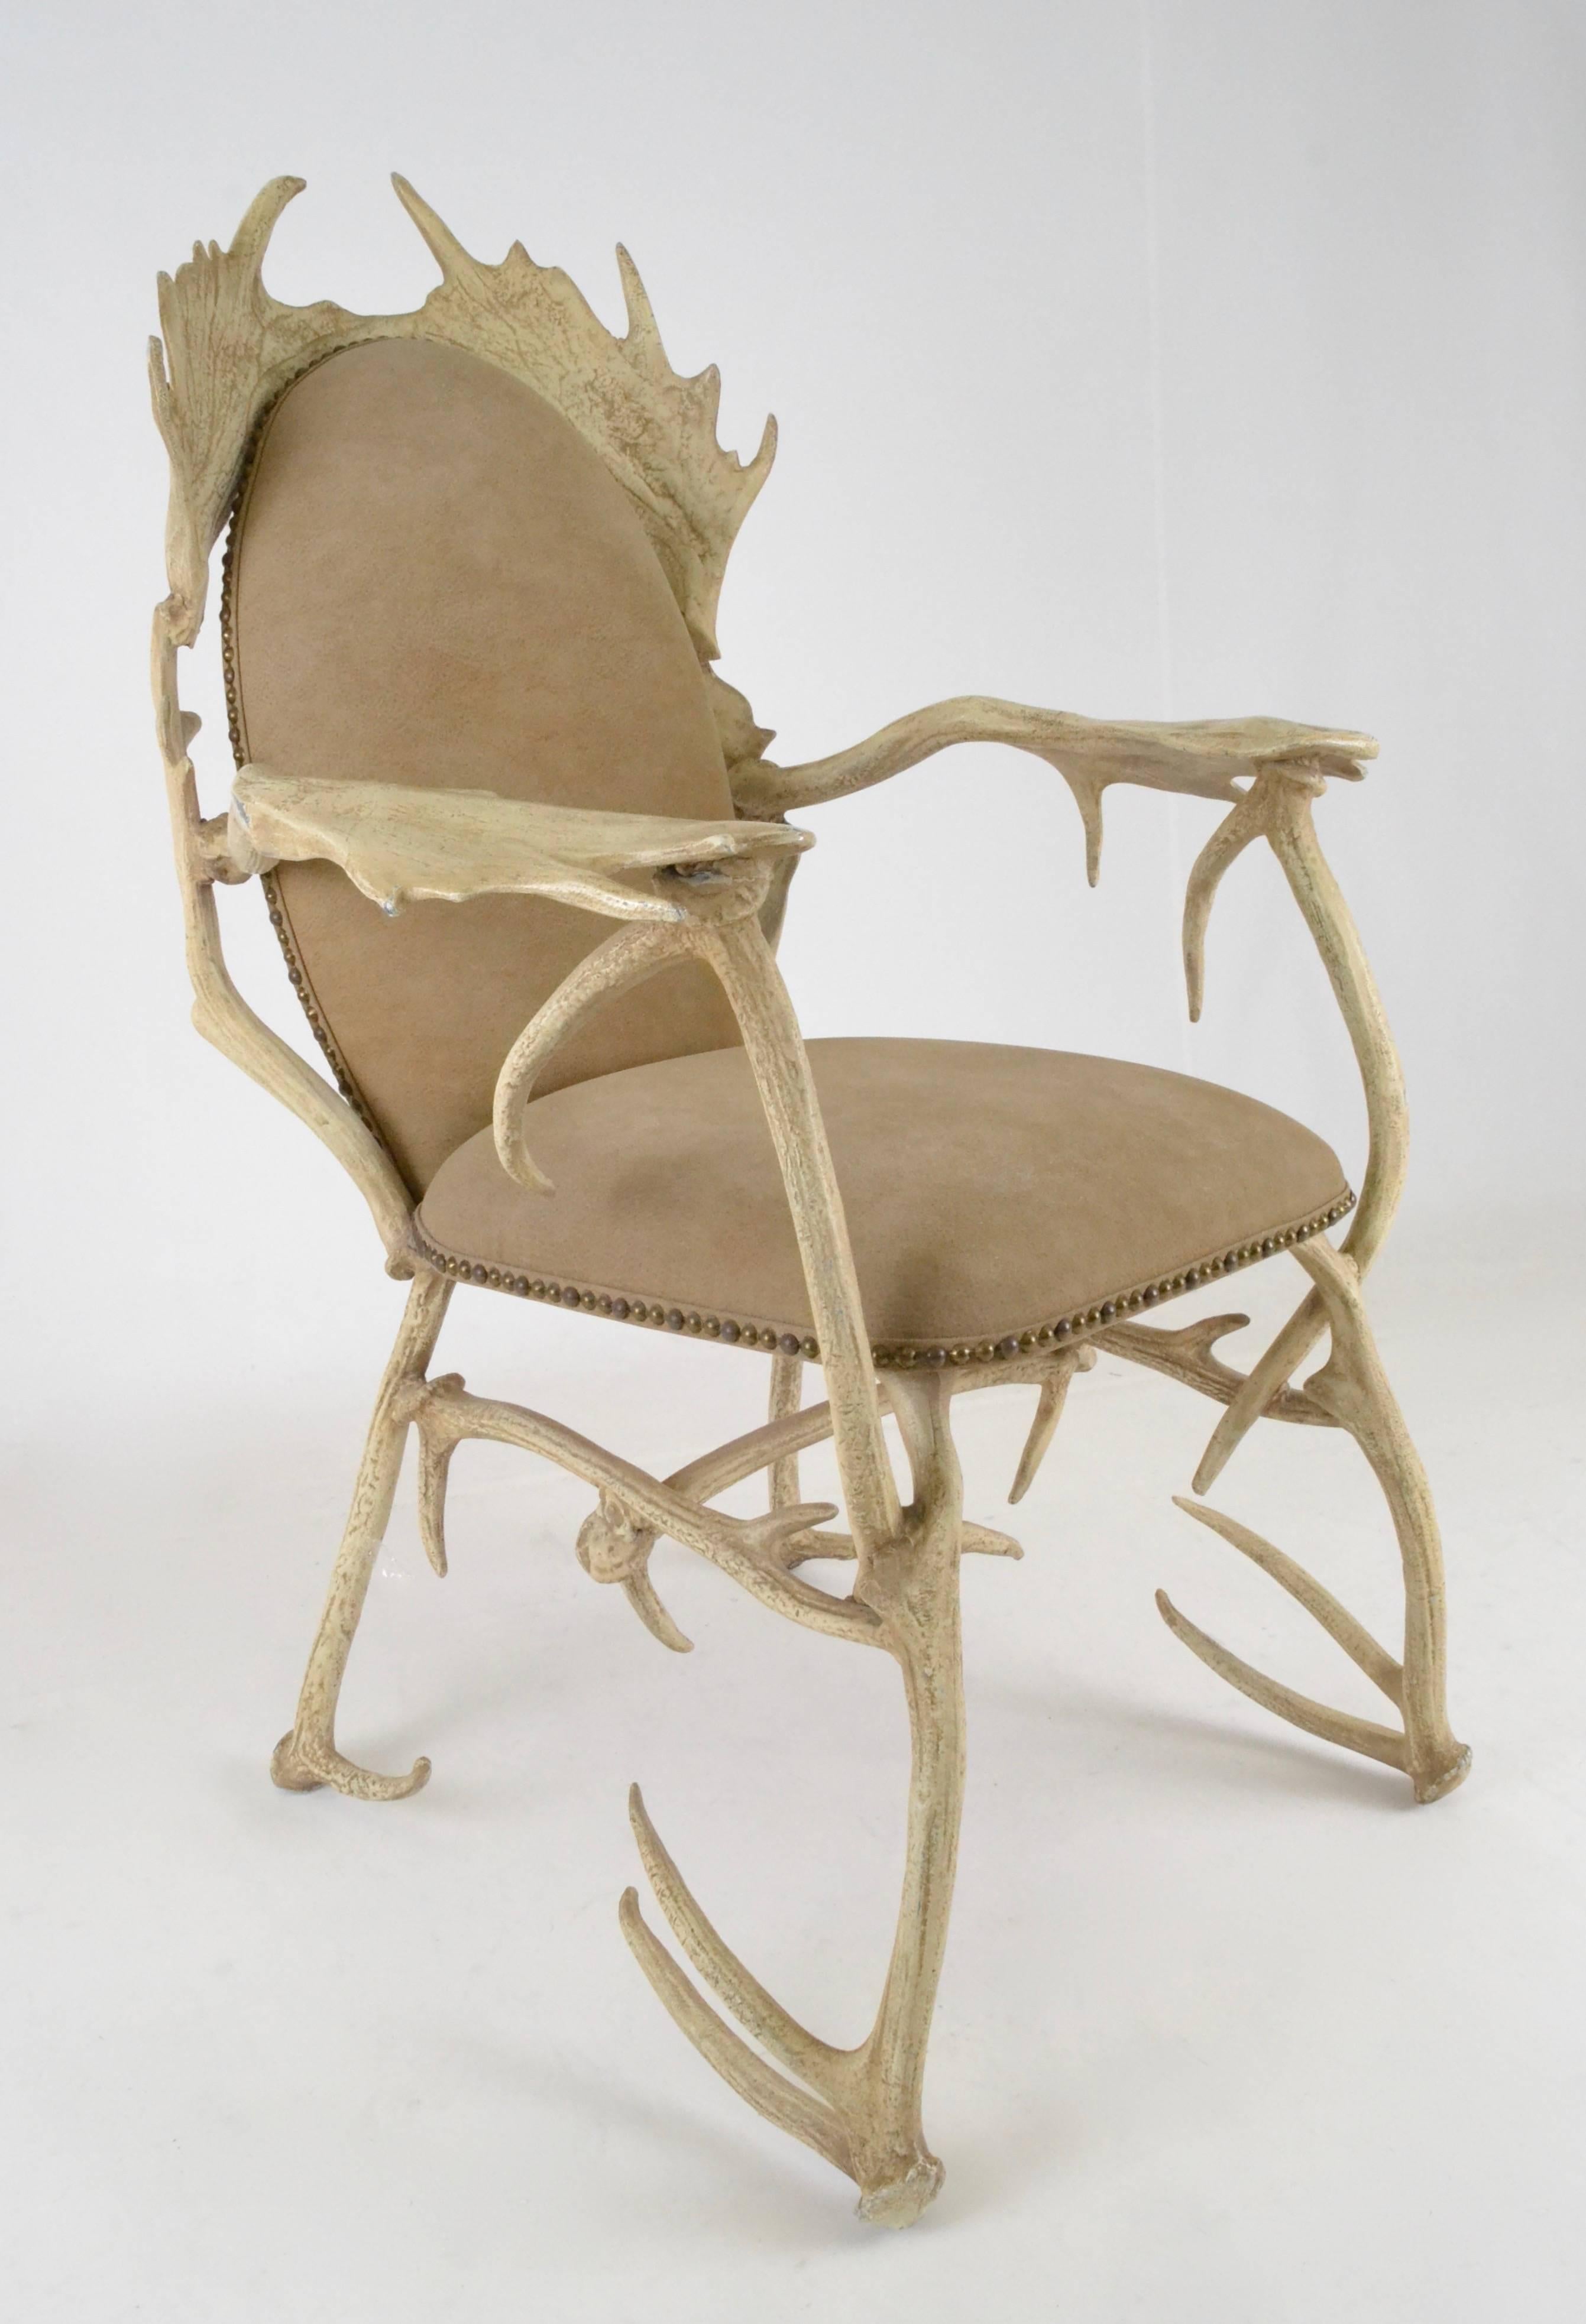 One of the greatest Arthur Court creations so whimsical and yet perfectly usably. Quite comfortable and very sturdy. Made of cast aluminum, painted to appear as natural antlers. Original faux suede upholstery with nail head detail is clean. Makers